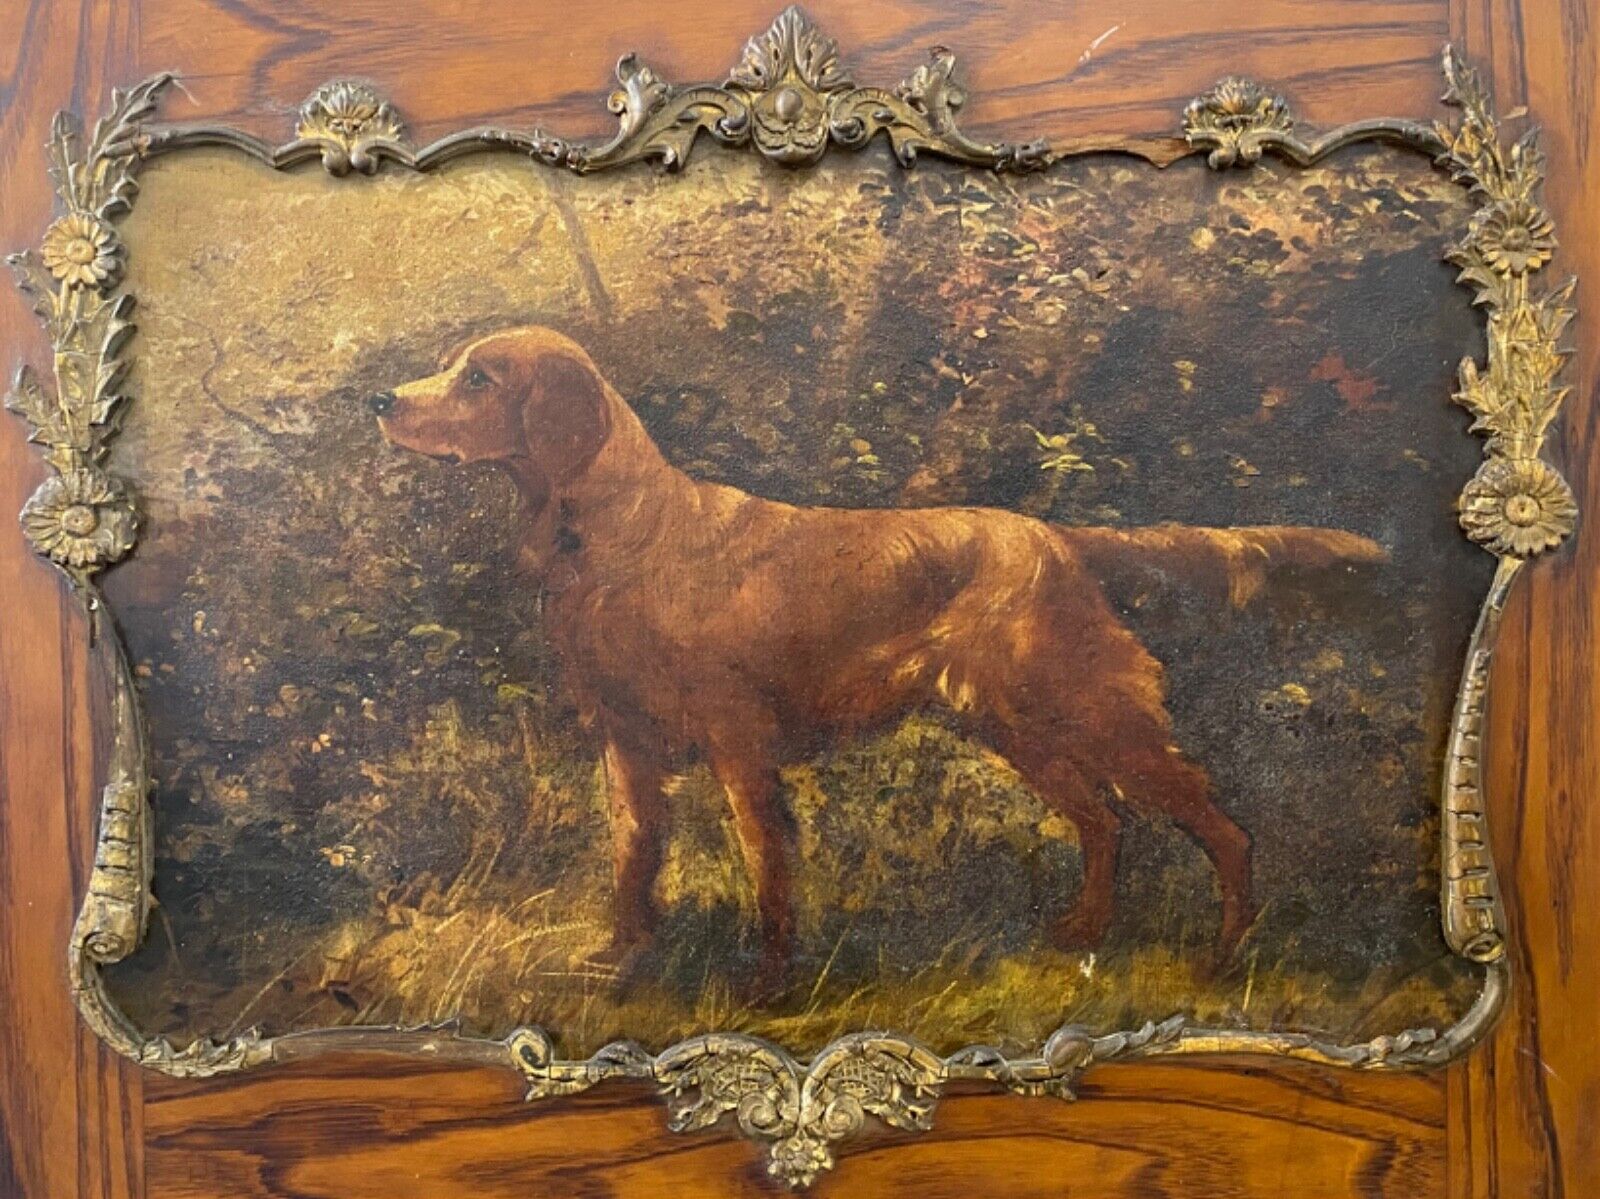 🔥 Fine Antique Early American Old 19th c Irish Setter Dog Portrait Oil Painting